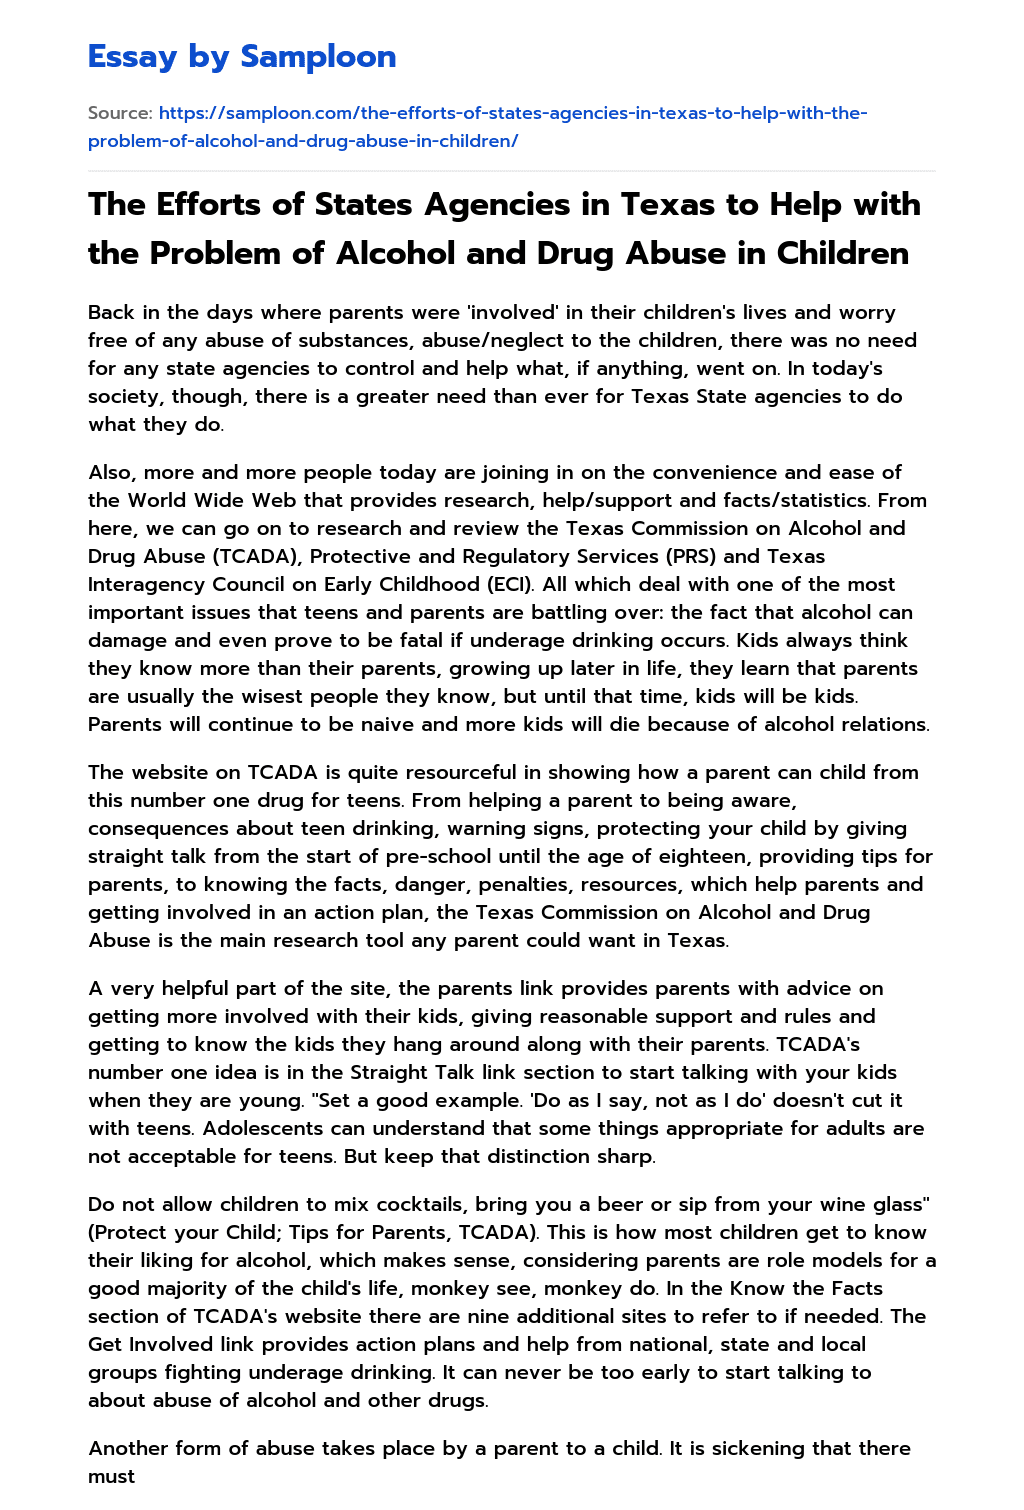 The Efforts of States Agencies in Texas to Help with the Problem of Alcohol and Drug Abuse in Children essay